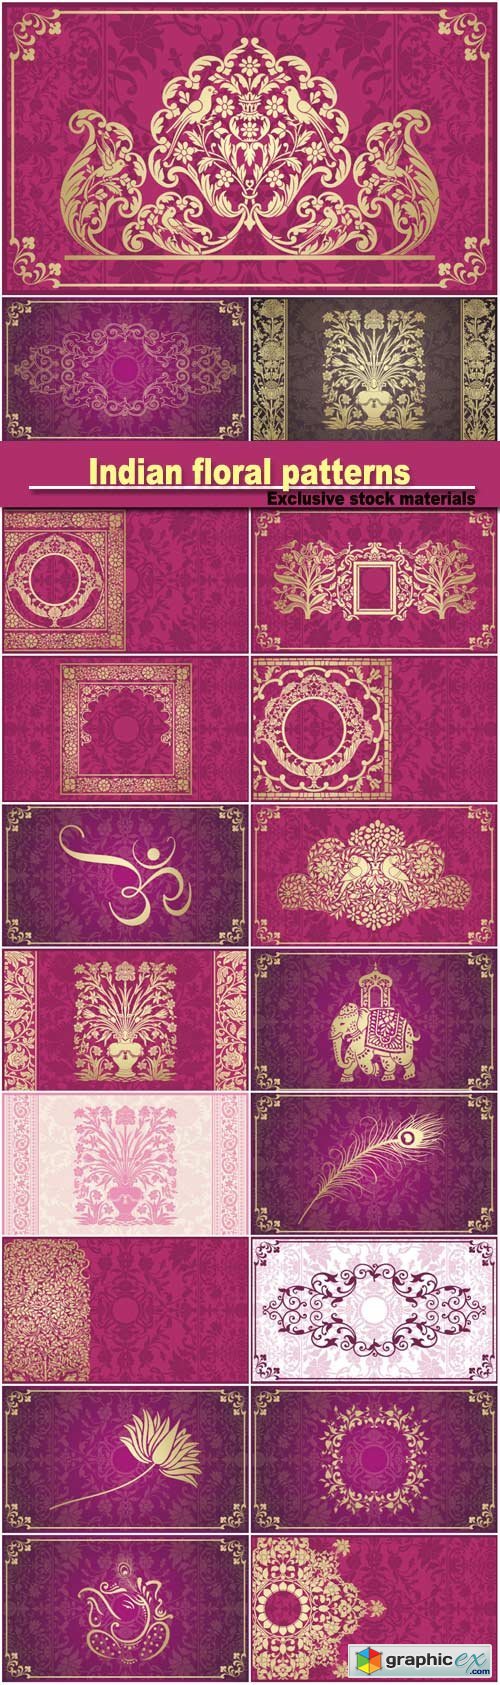 Indian floral patterns, vector backgrounds